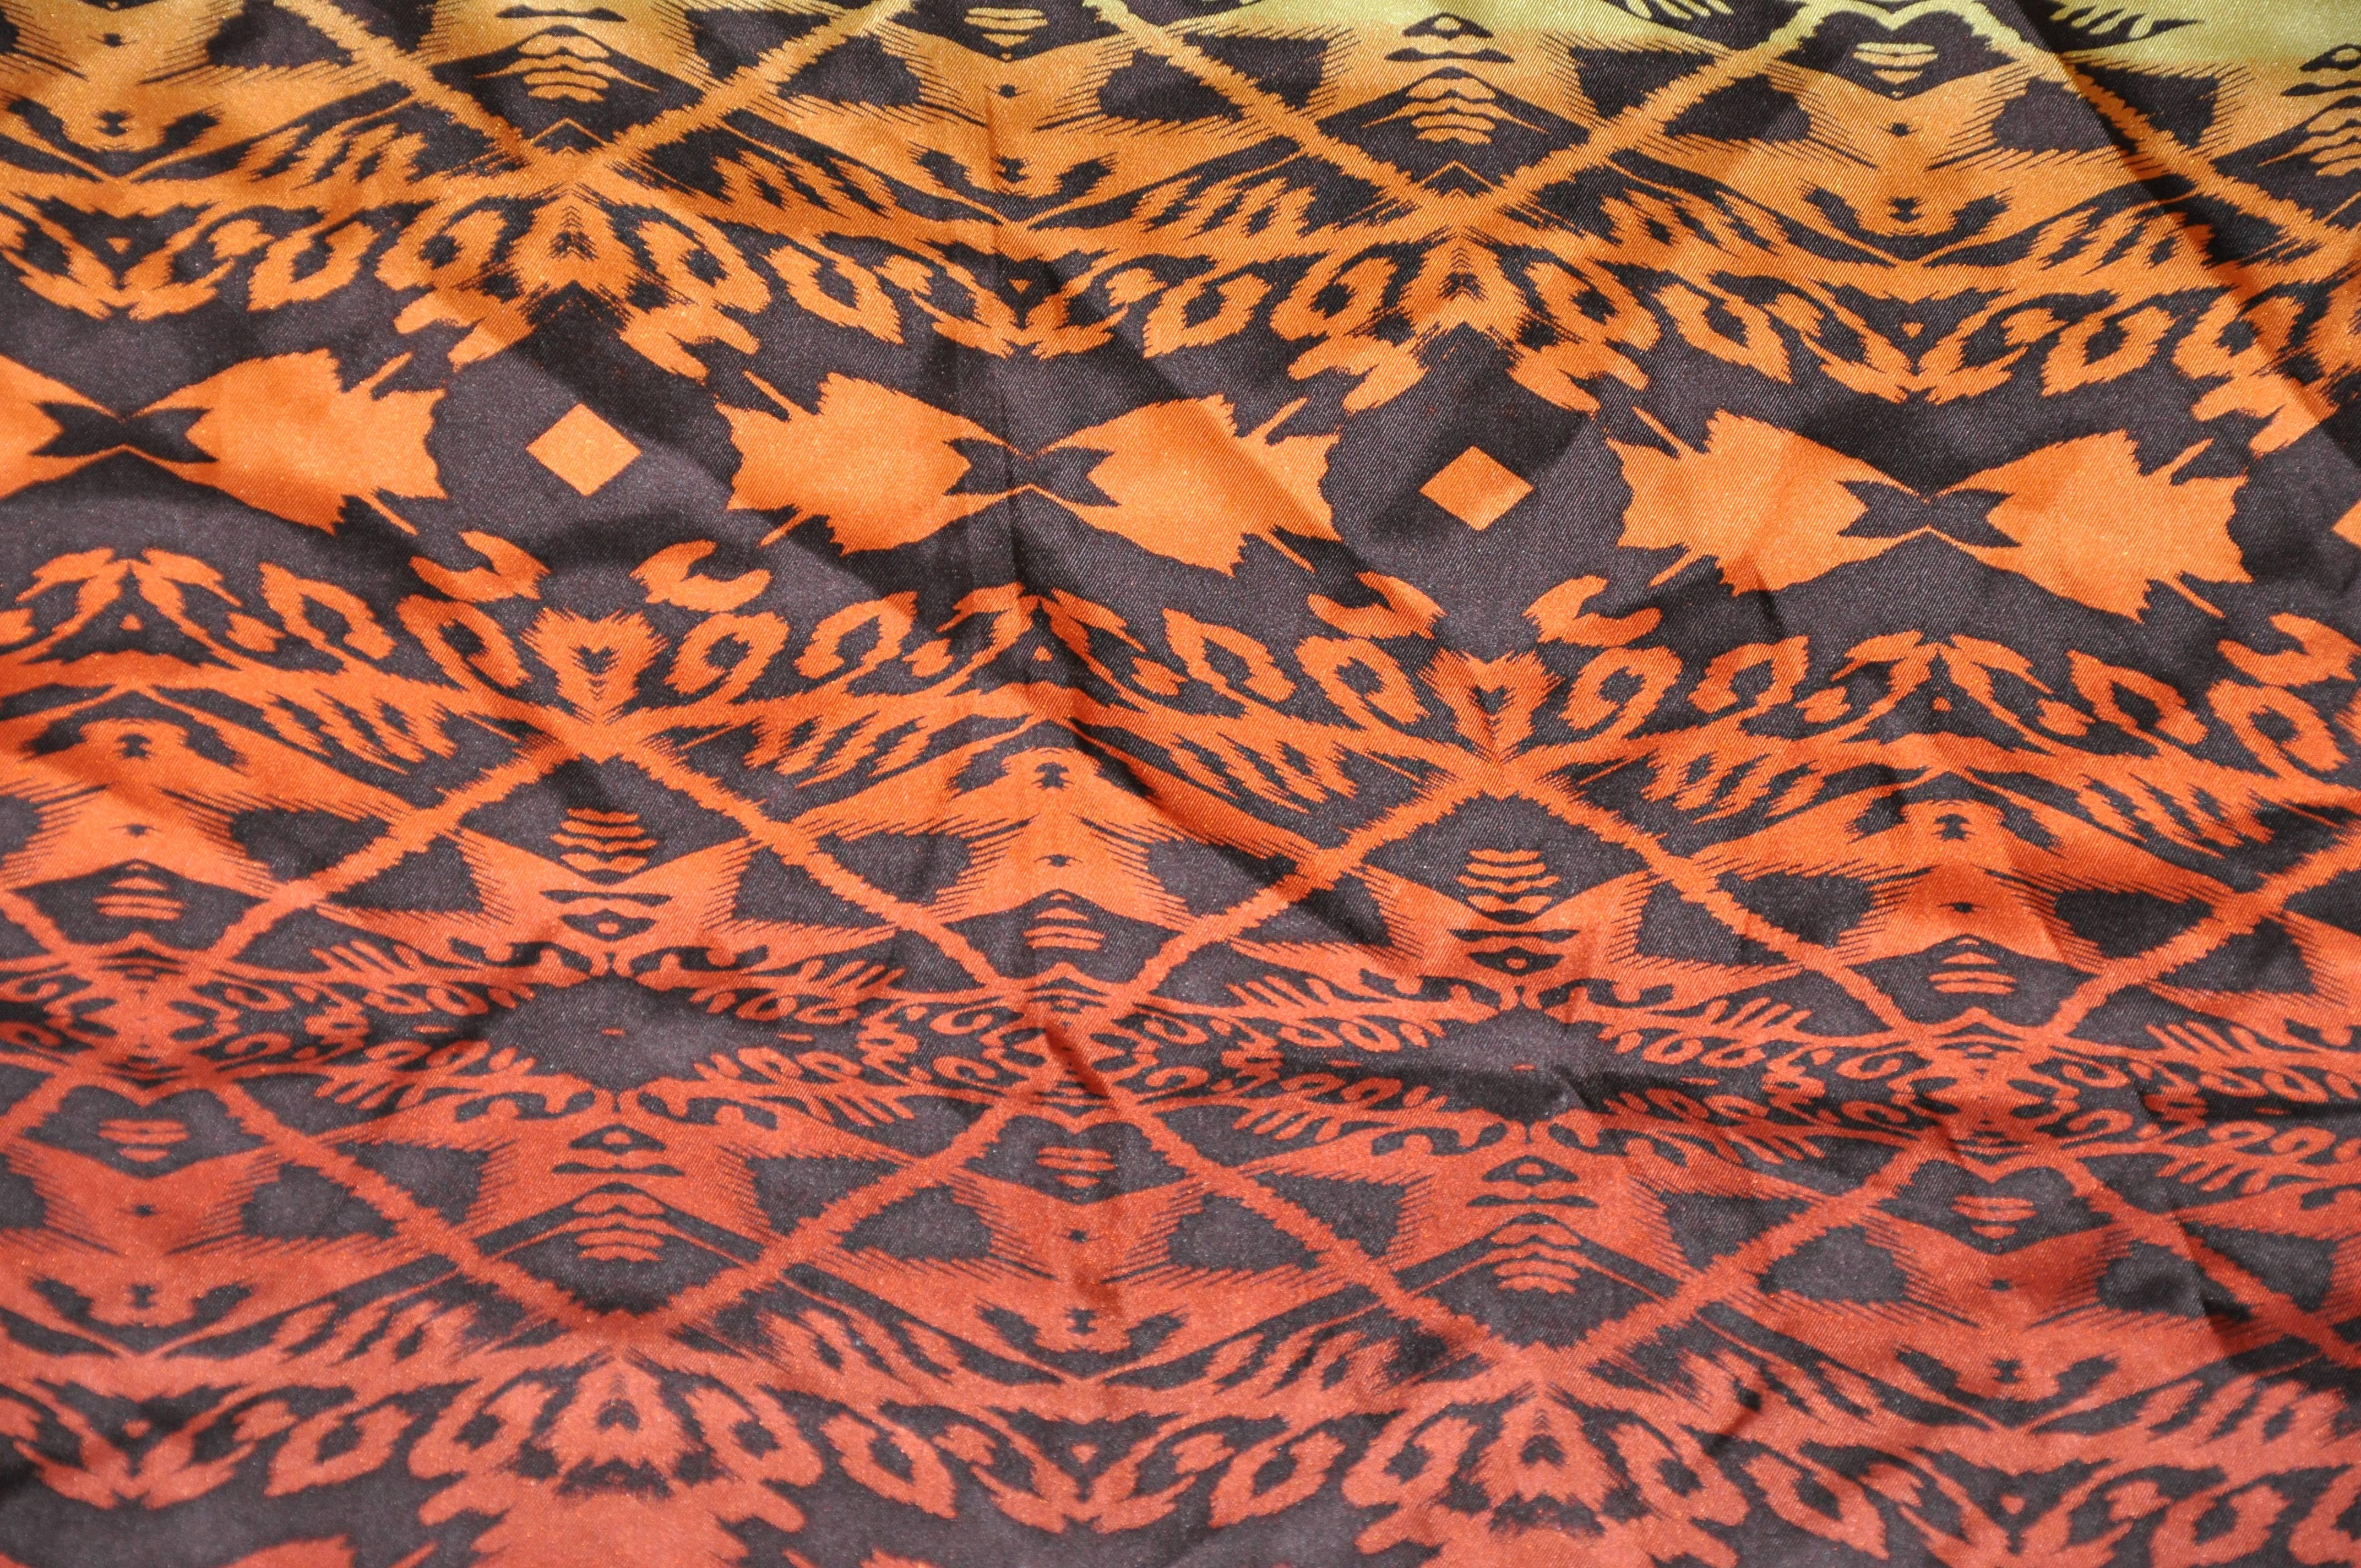 Nicole Miller multi "Autumn Shades" silk scarf measures 34" x 35", and finished with rolled edges. Made in Italy.